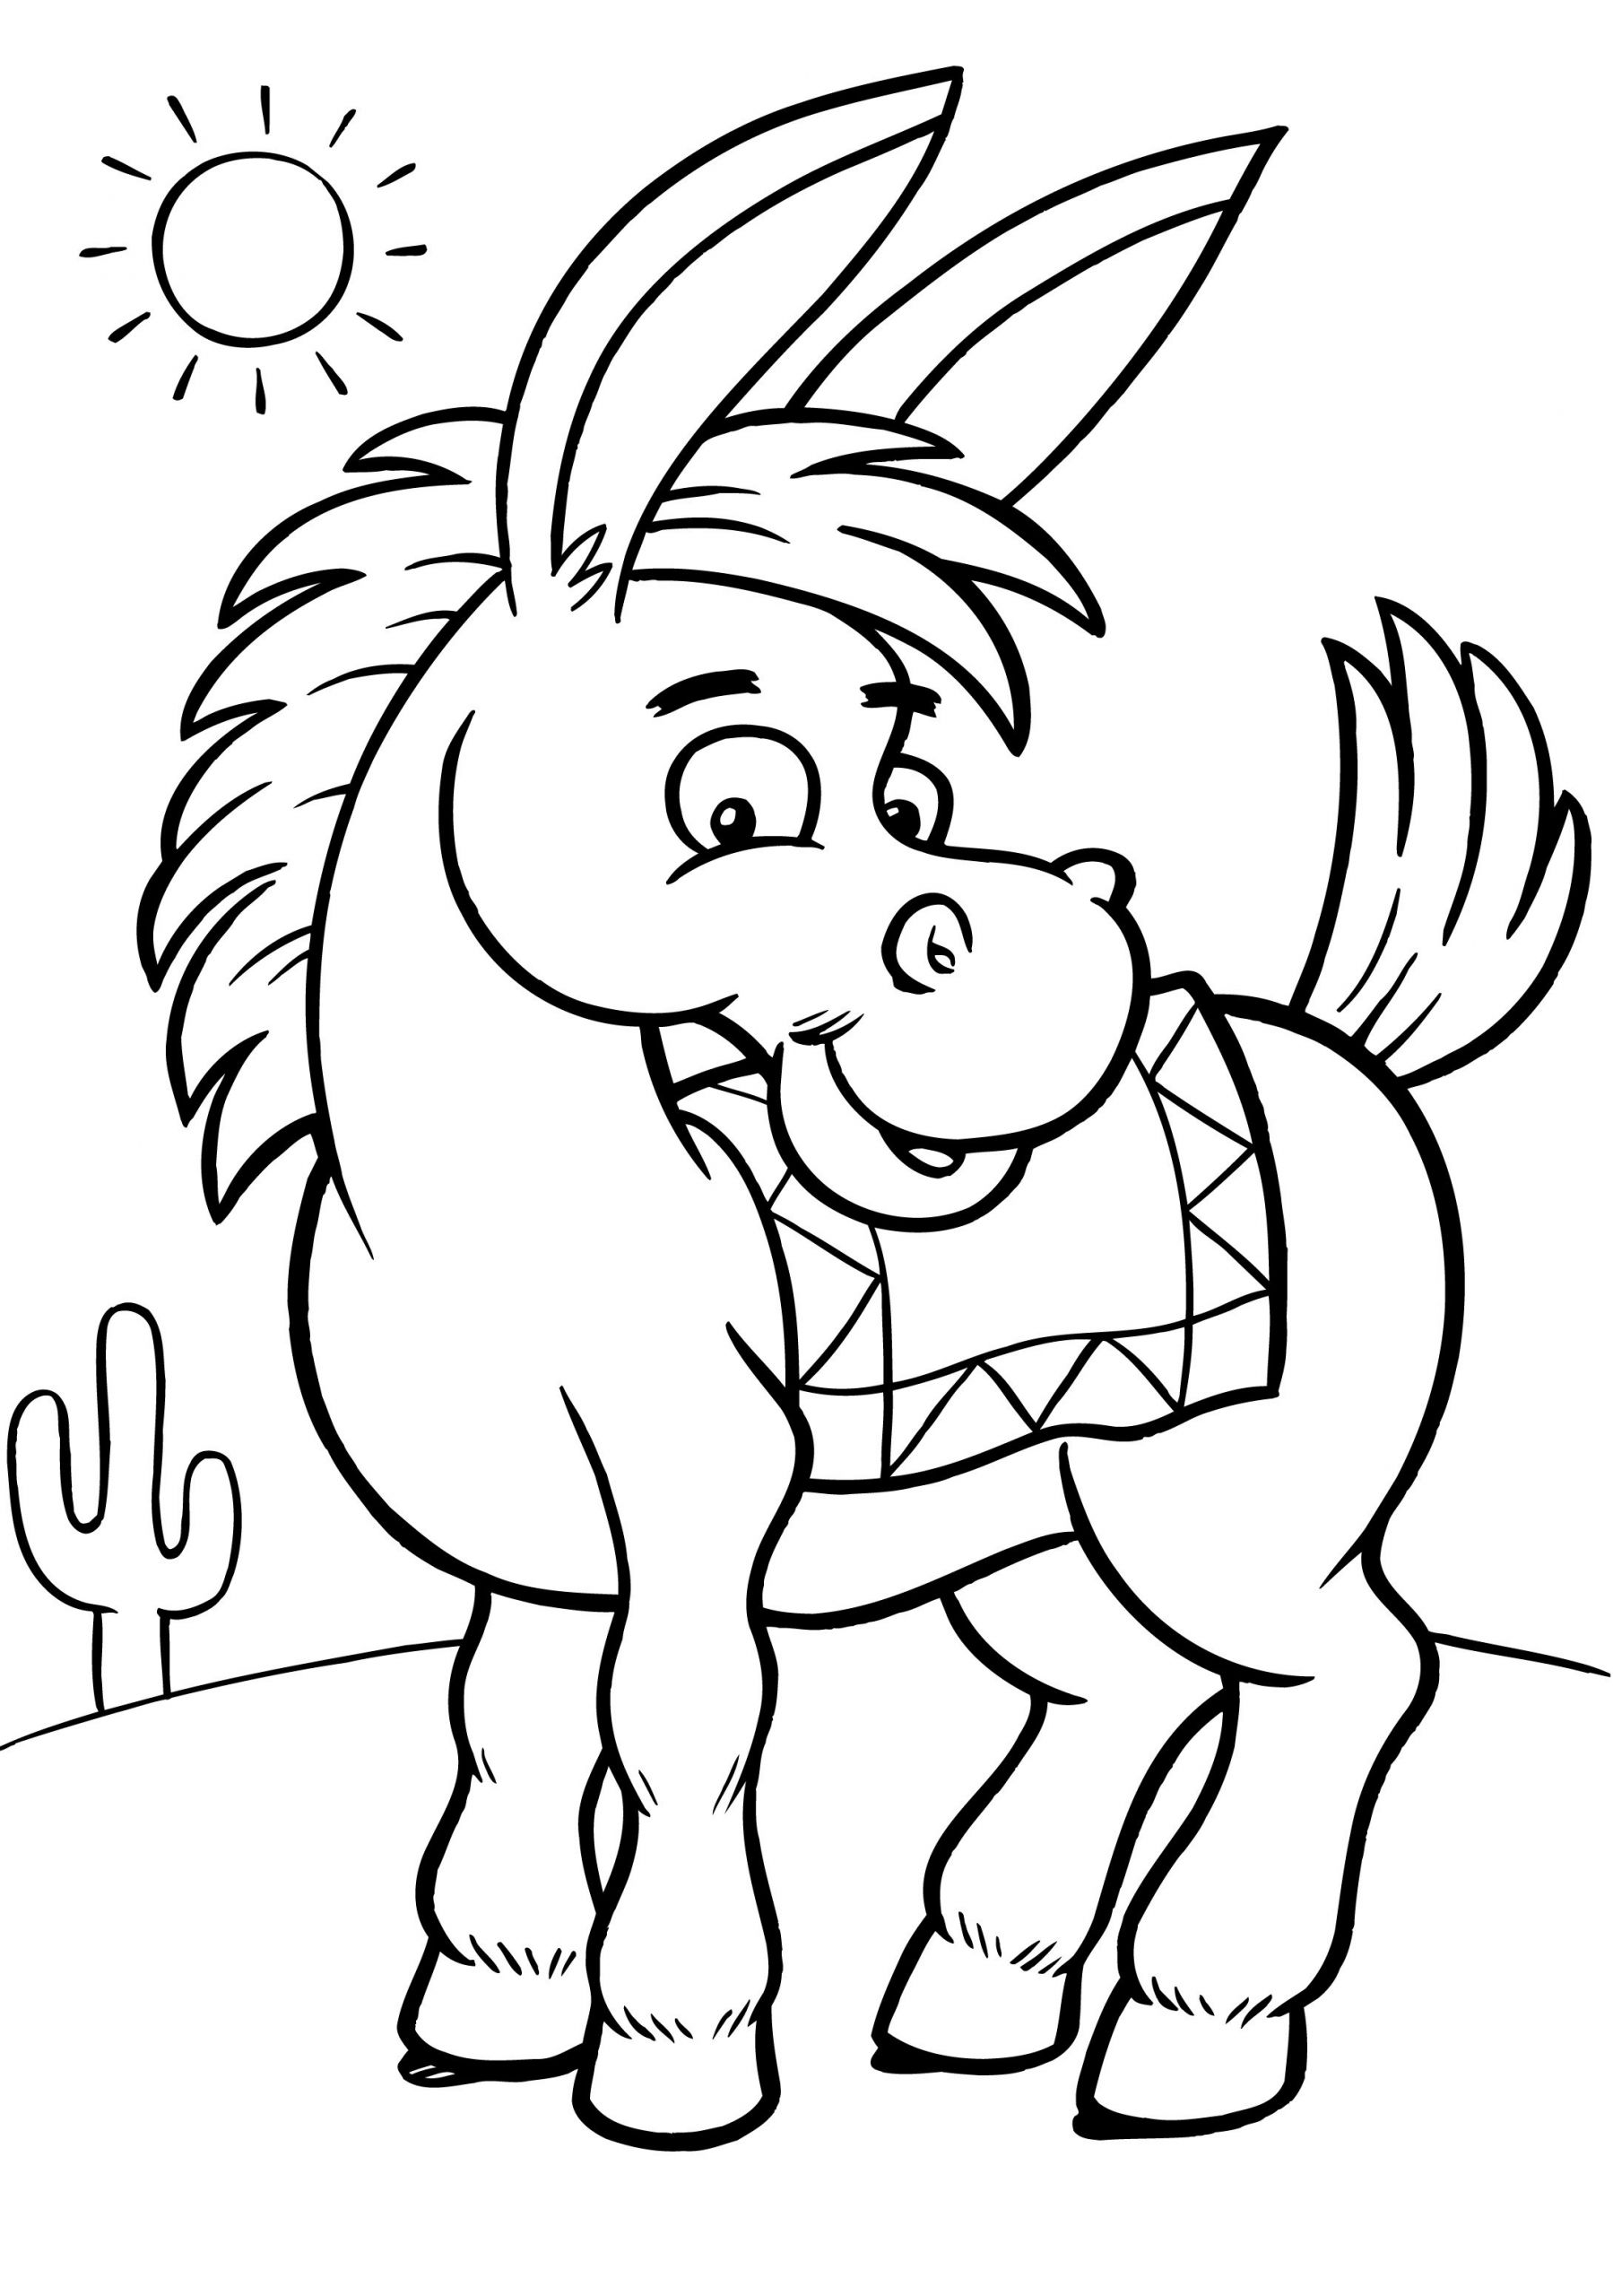 Free Printable Kids Coloring Pages
 Free Printable Donkey Coloring Pages For Kids